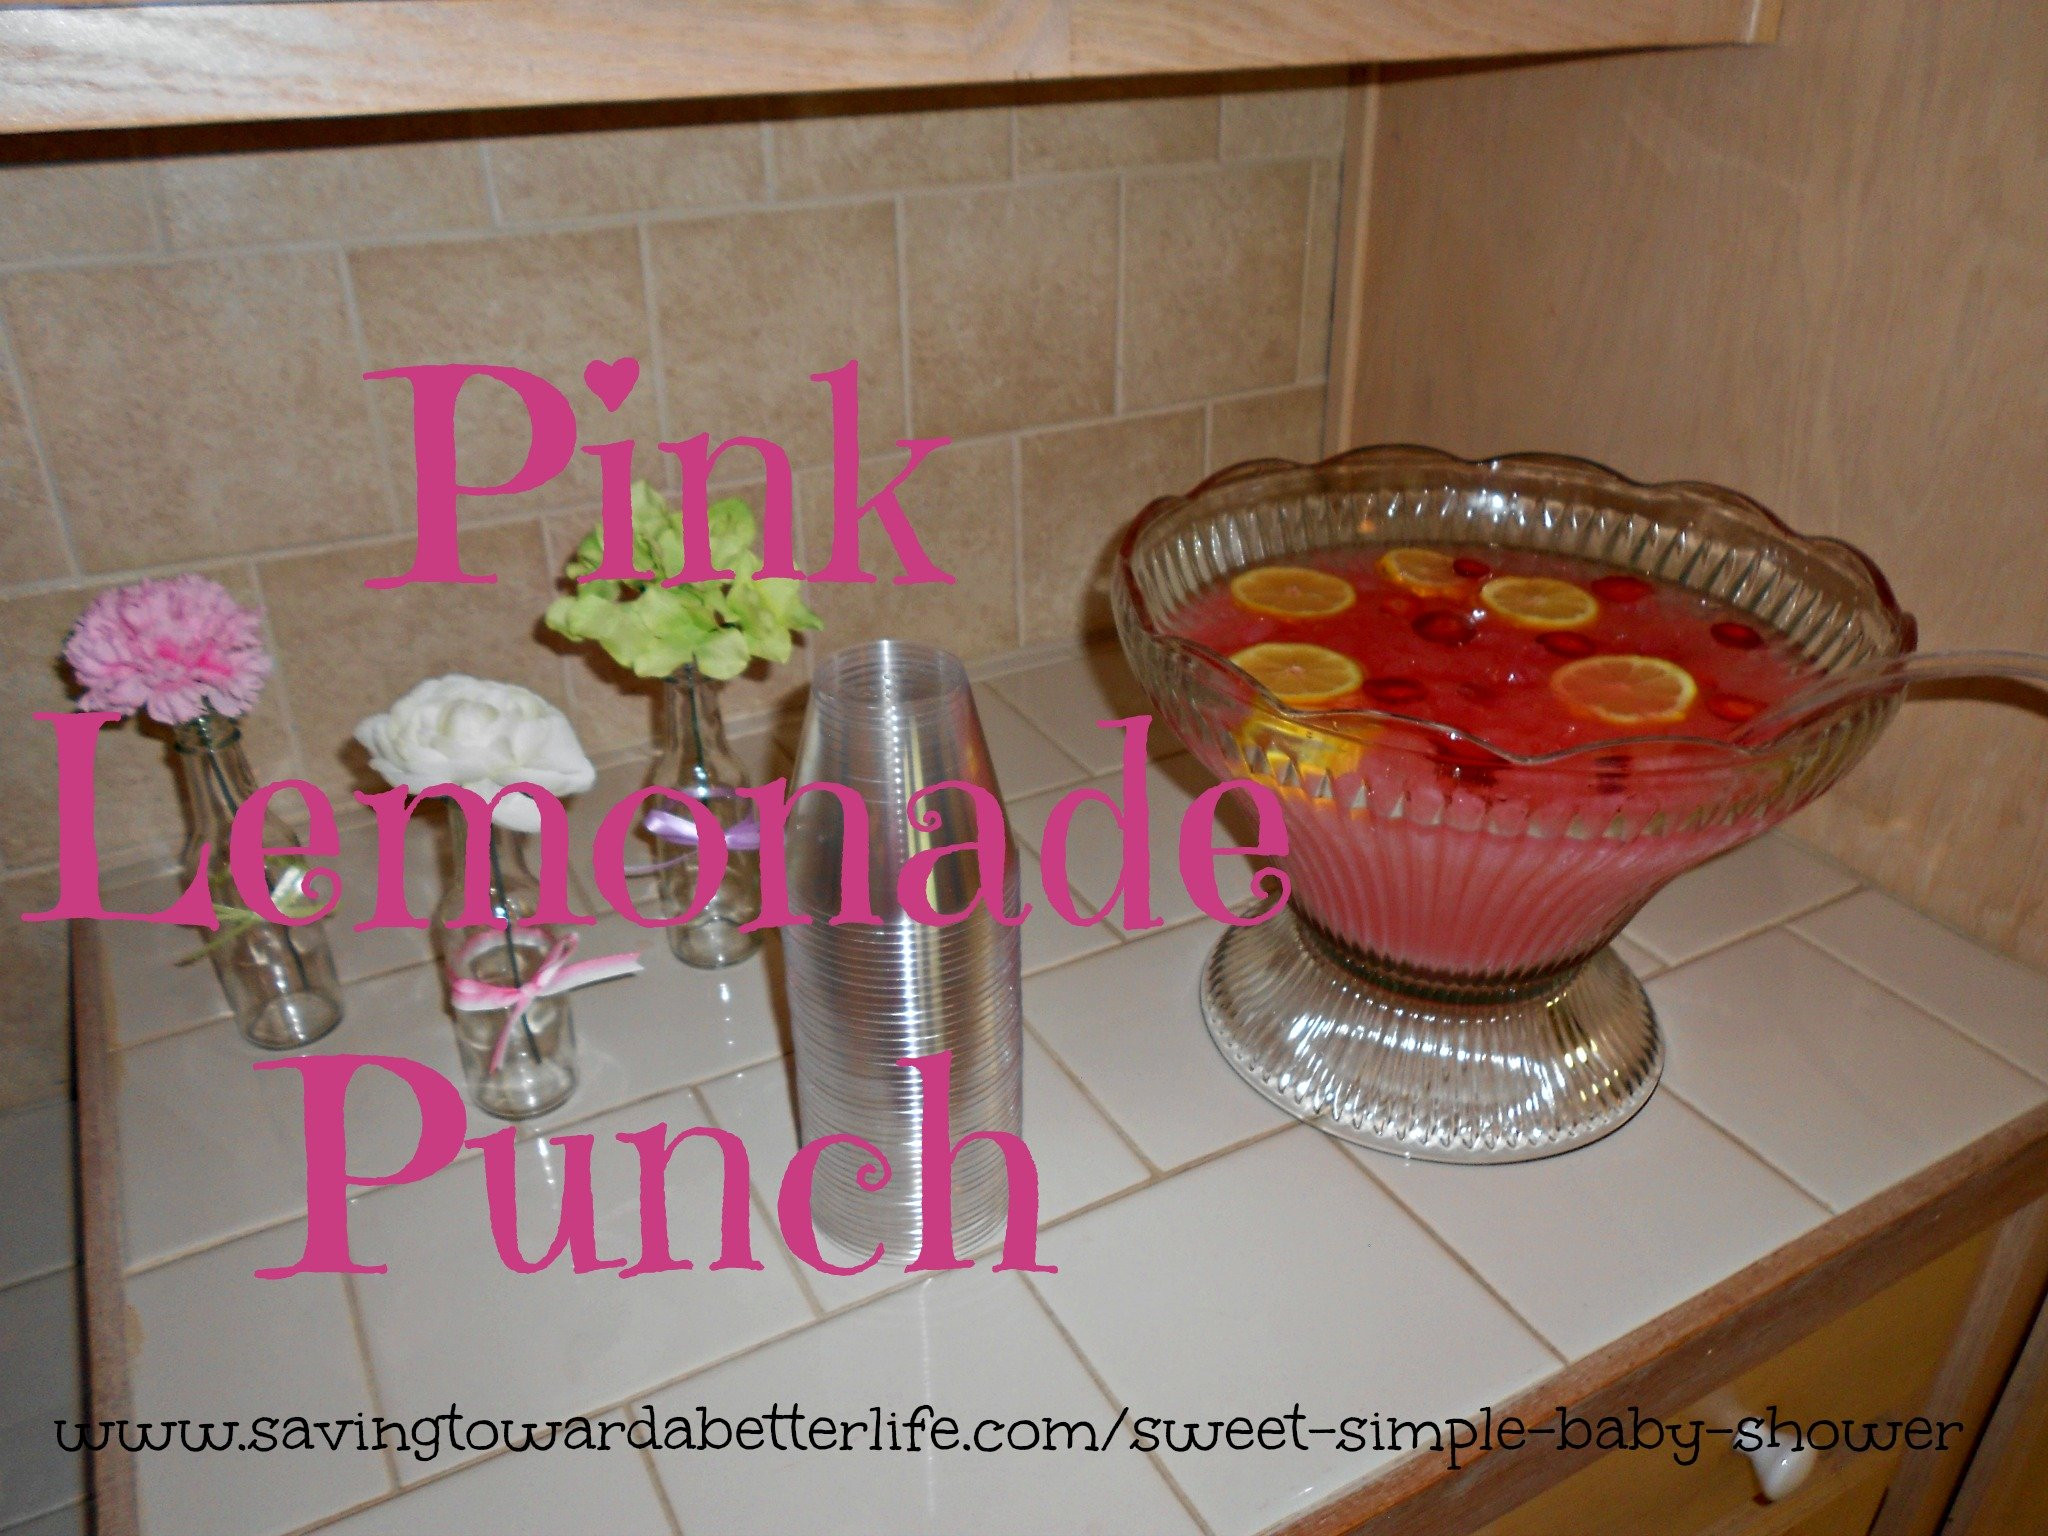 Pink Lemonade Punch Recipes For Baby Shower
 Sweet and Simple Baby Shower Ideas Saving Toward A